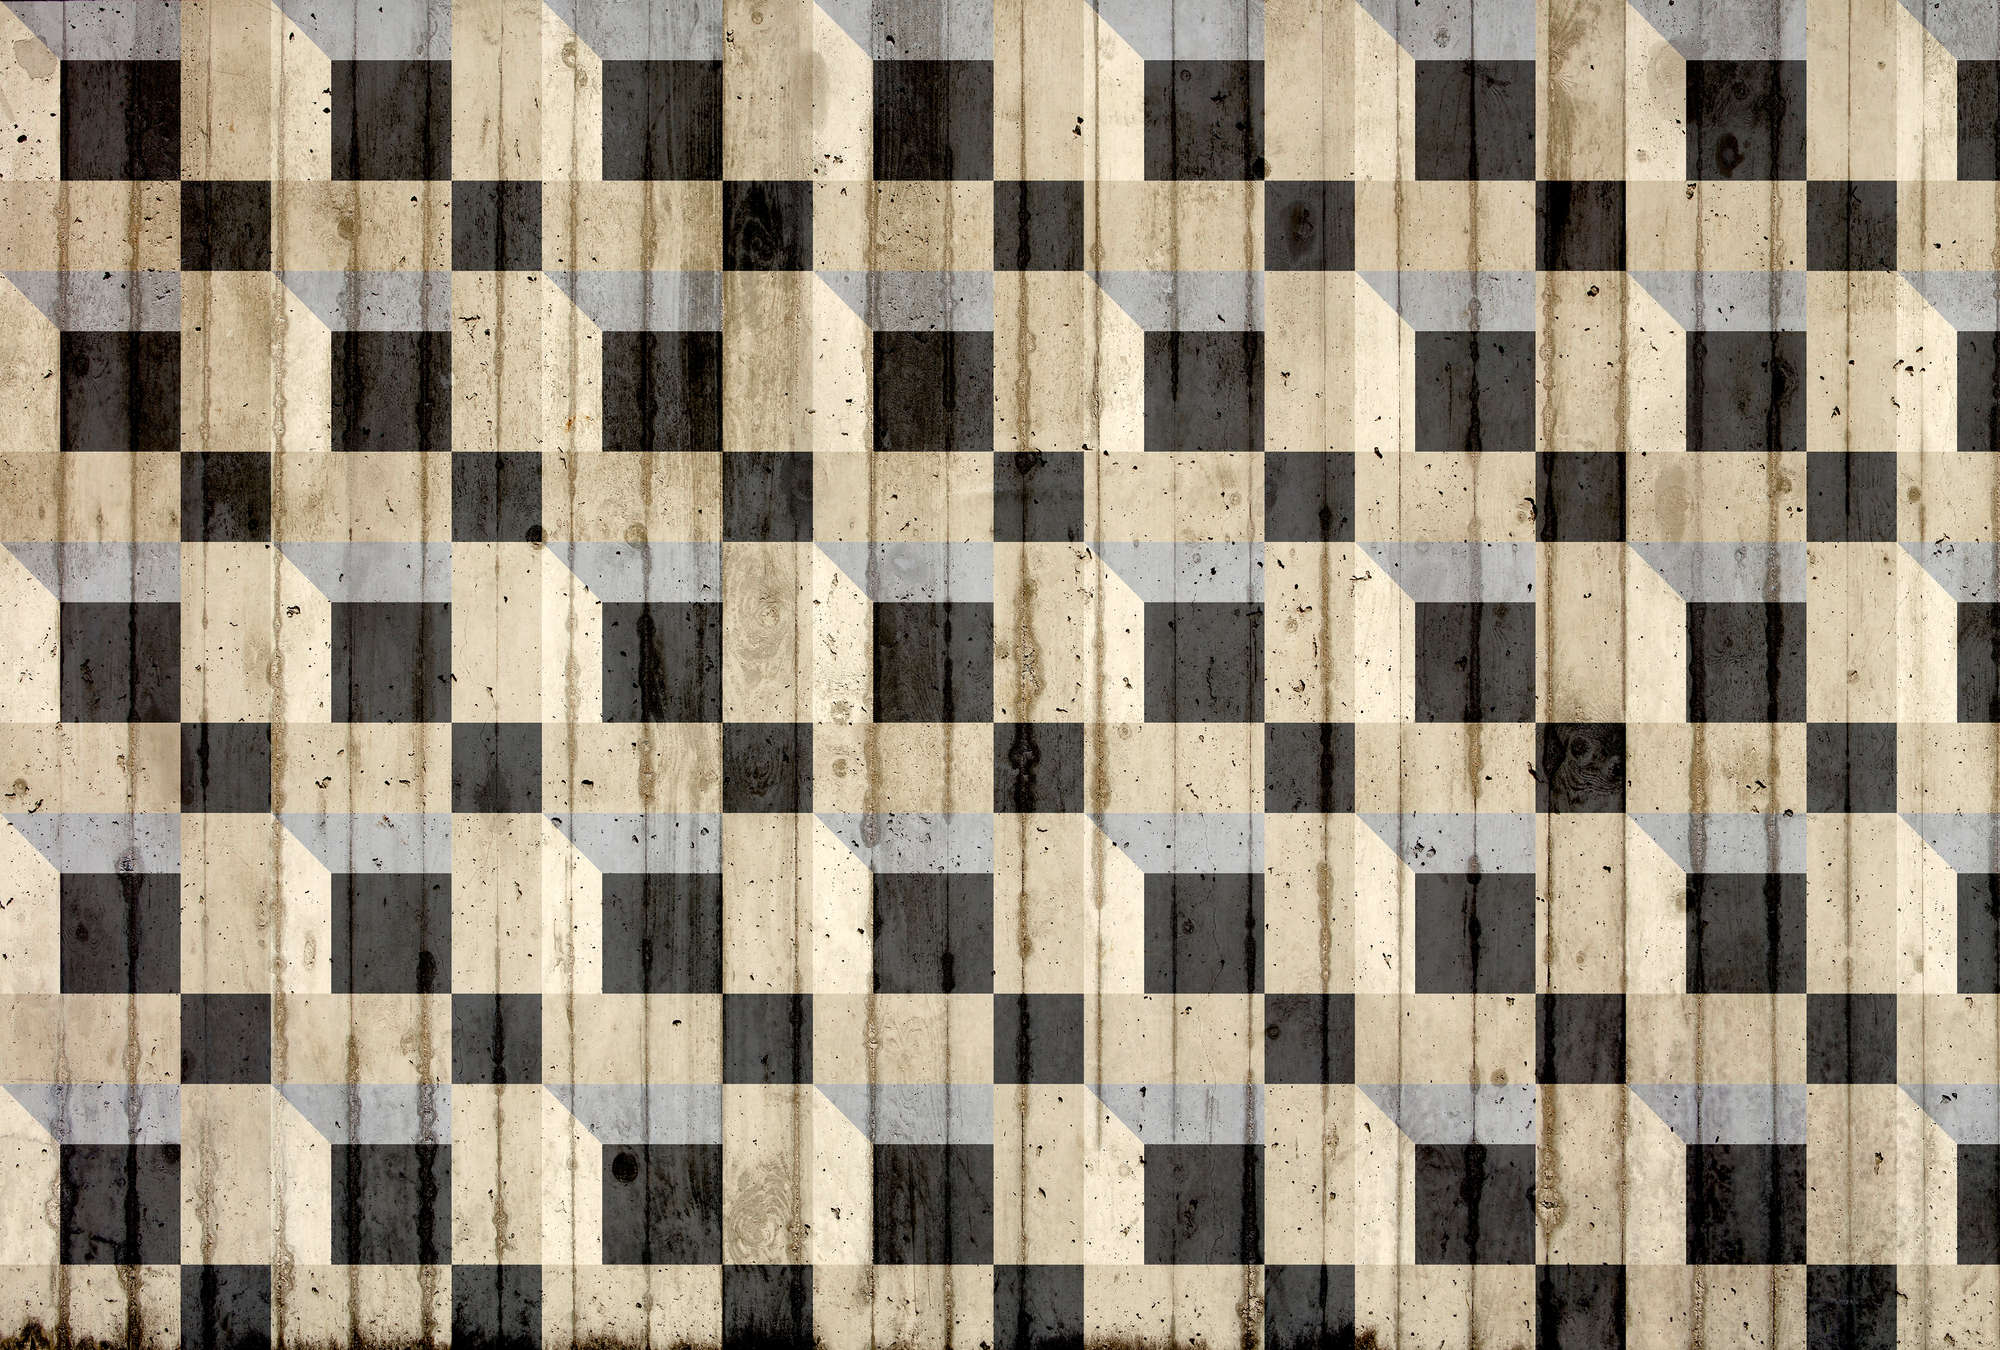             Concrete photo wallpaper with layered look & cube pattern - Beige, Black, Grey
        